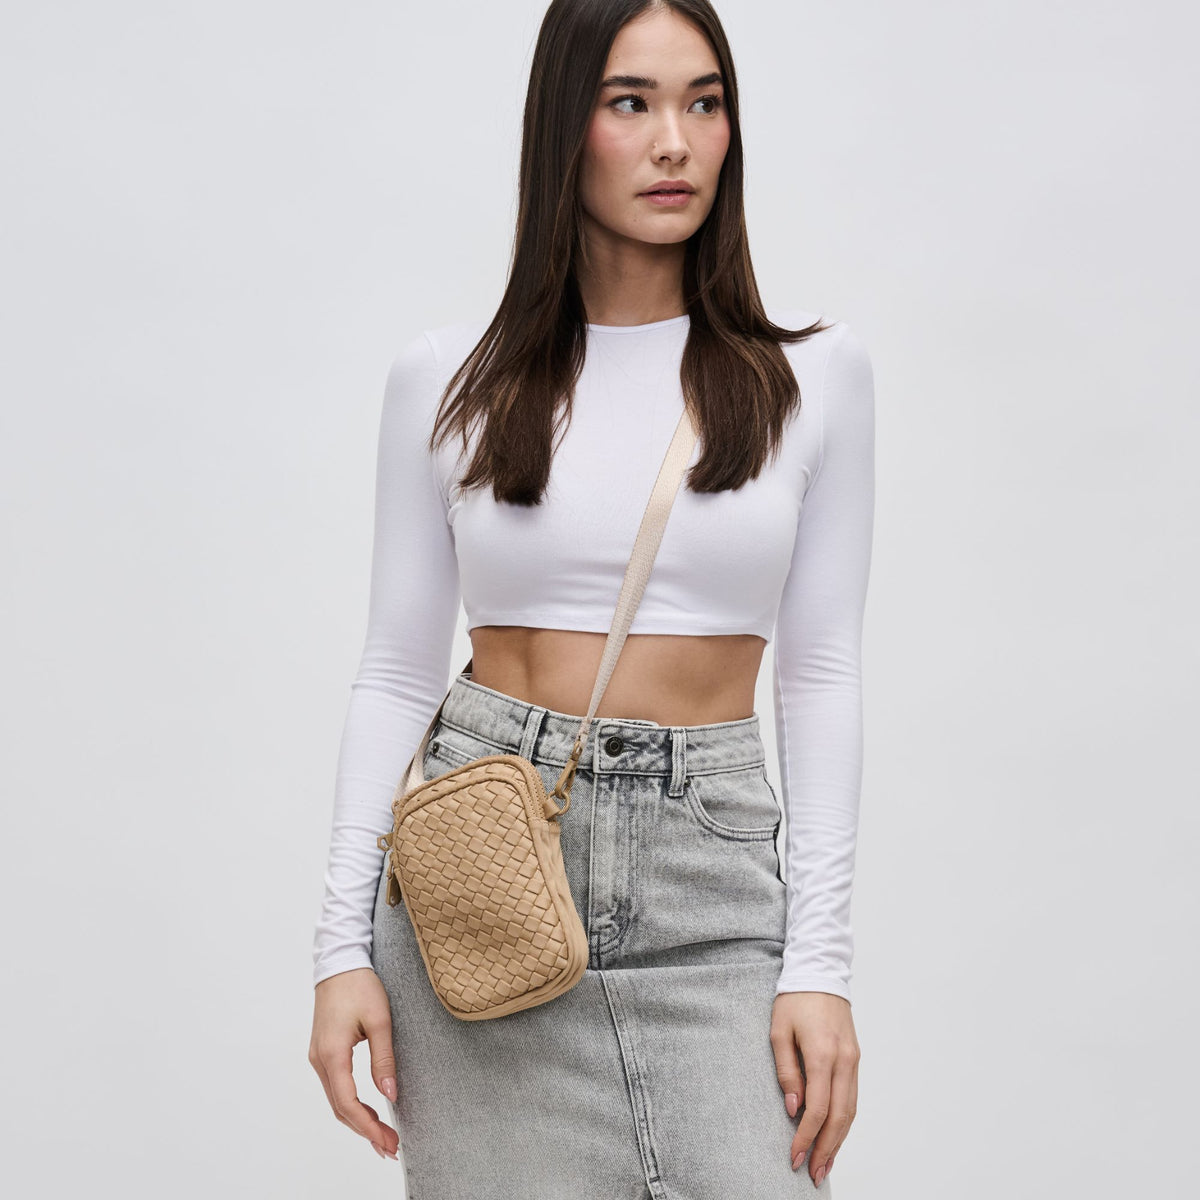 Woman wearing Nude Sol and Selene Divide & Conquer - Woven Neoprene Crossbody 841764108713 View 2 | Nude